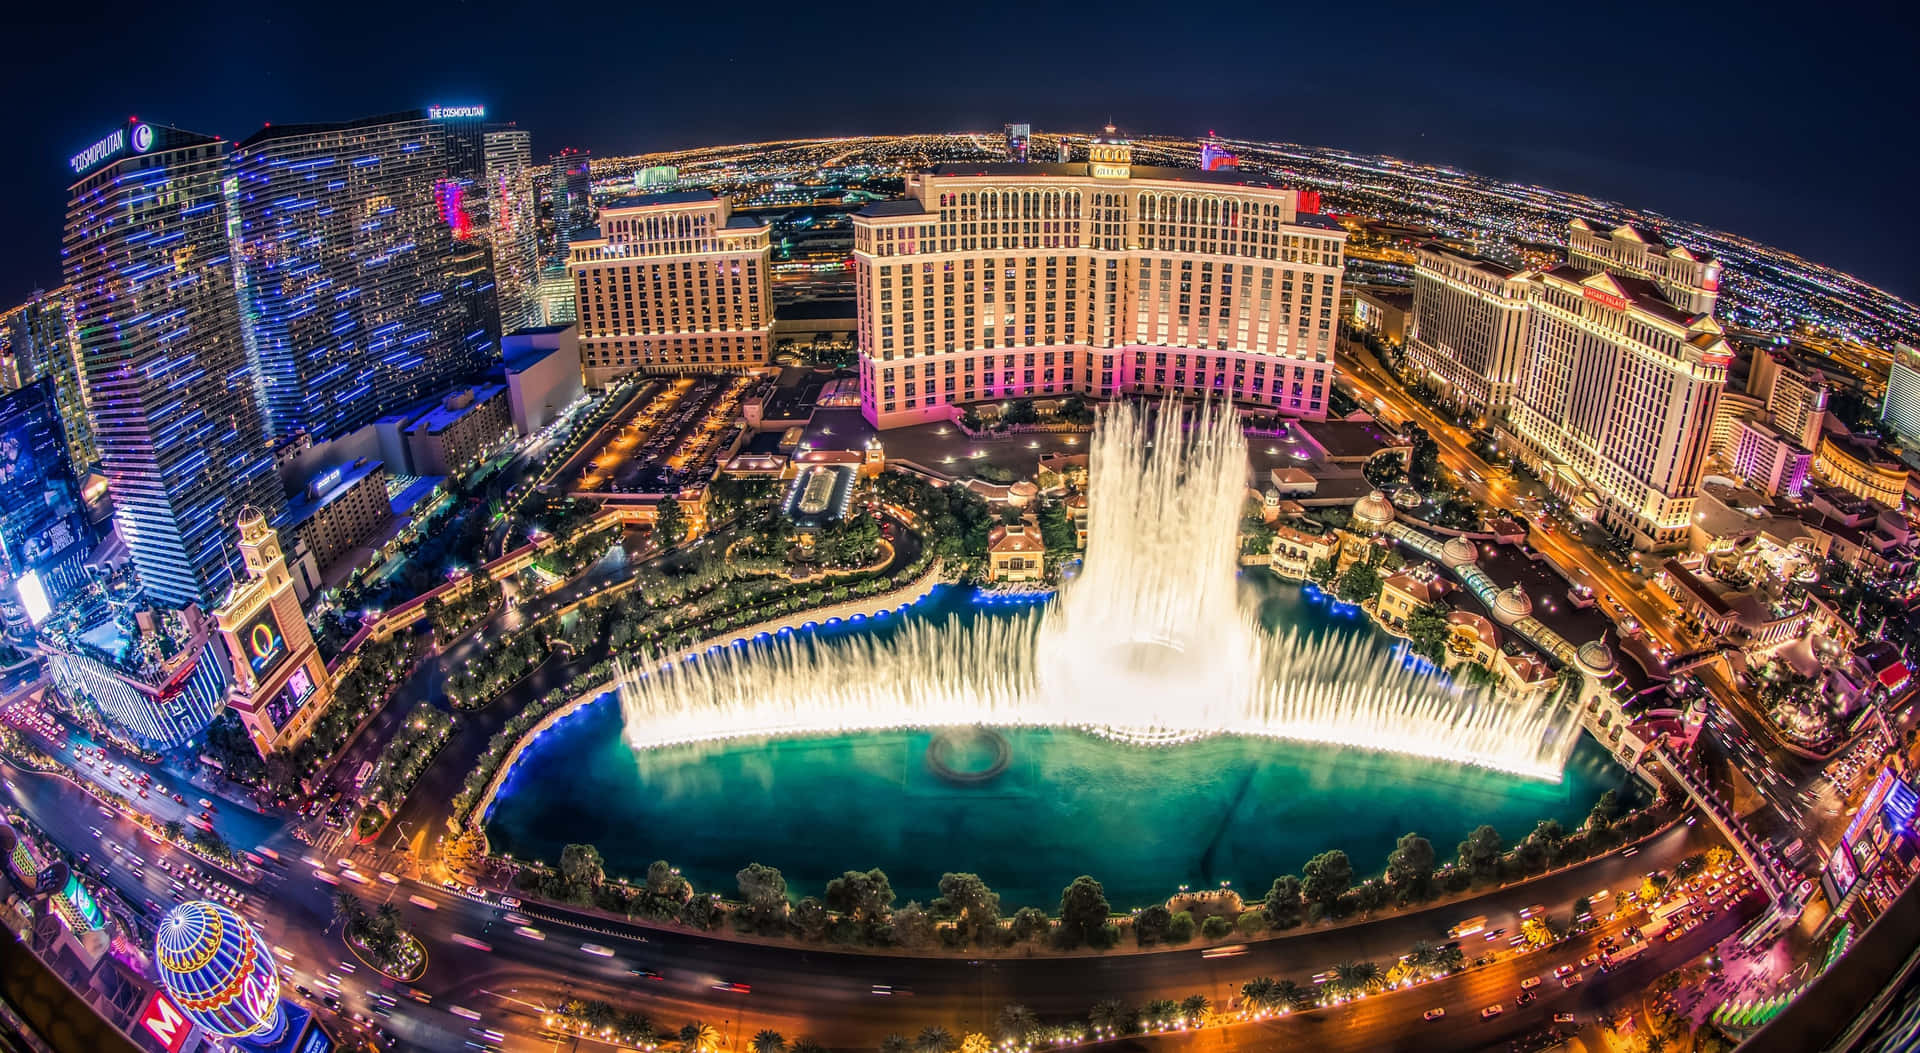 Download Enjoy the beauty and excitement of Las Vegas